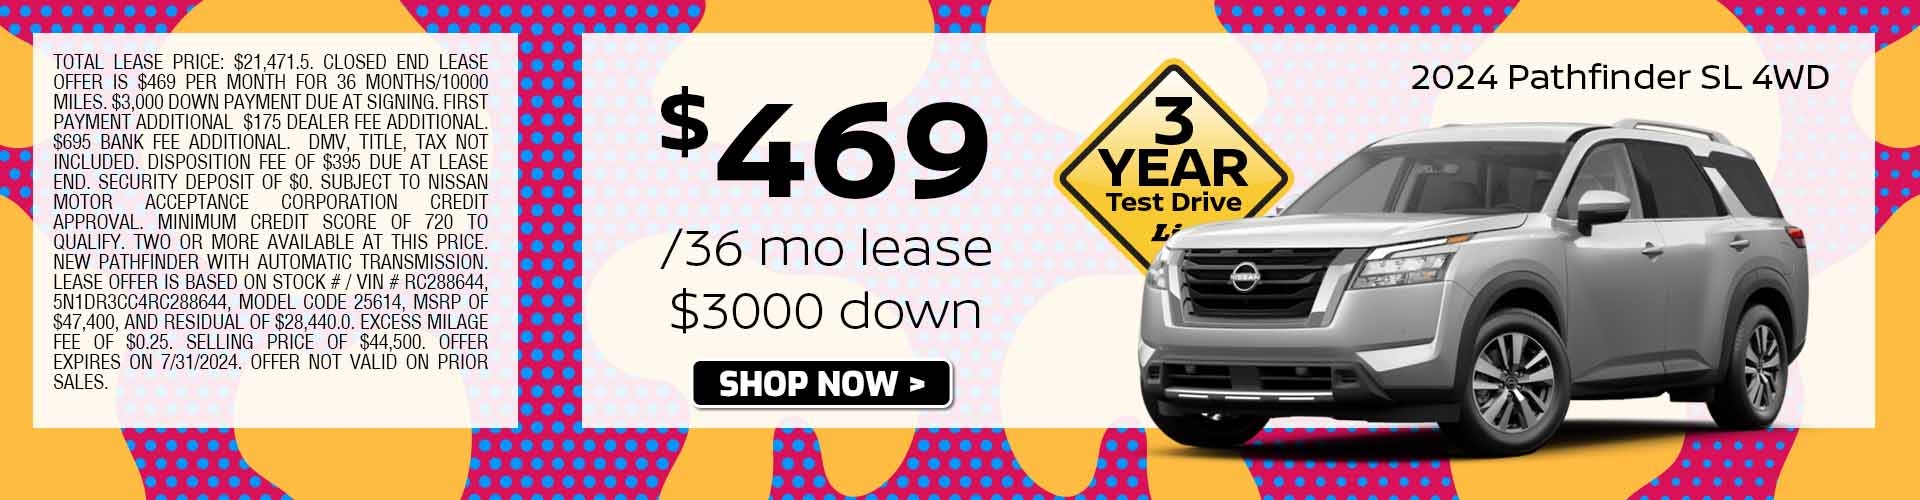 pathfinder lease special